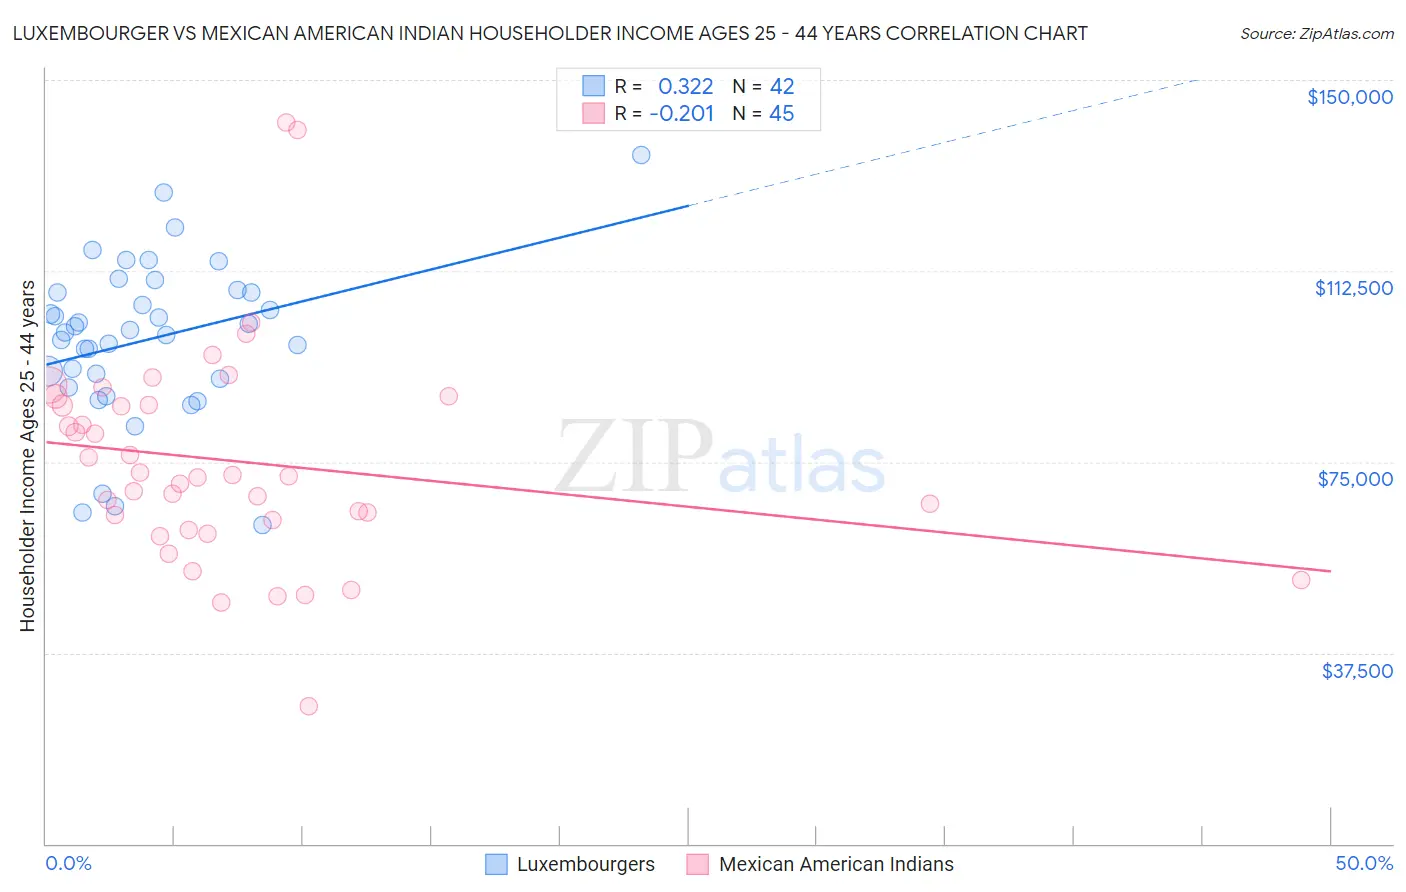 Luxembourger vs Mexican American Indian Householder Income Ages 25 - 44 years